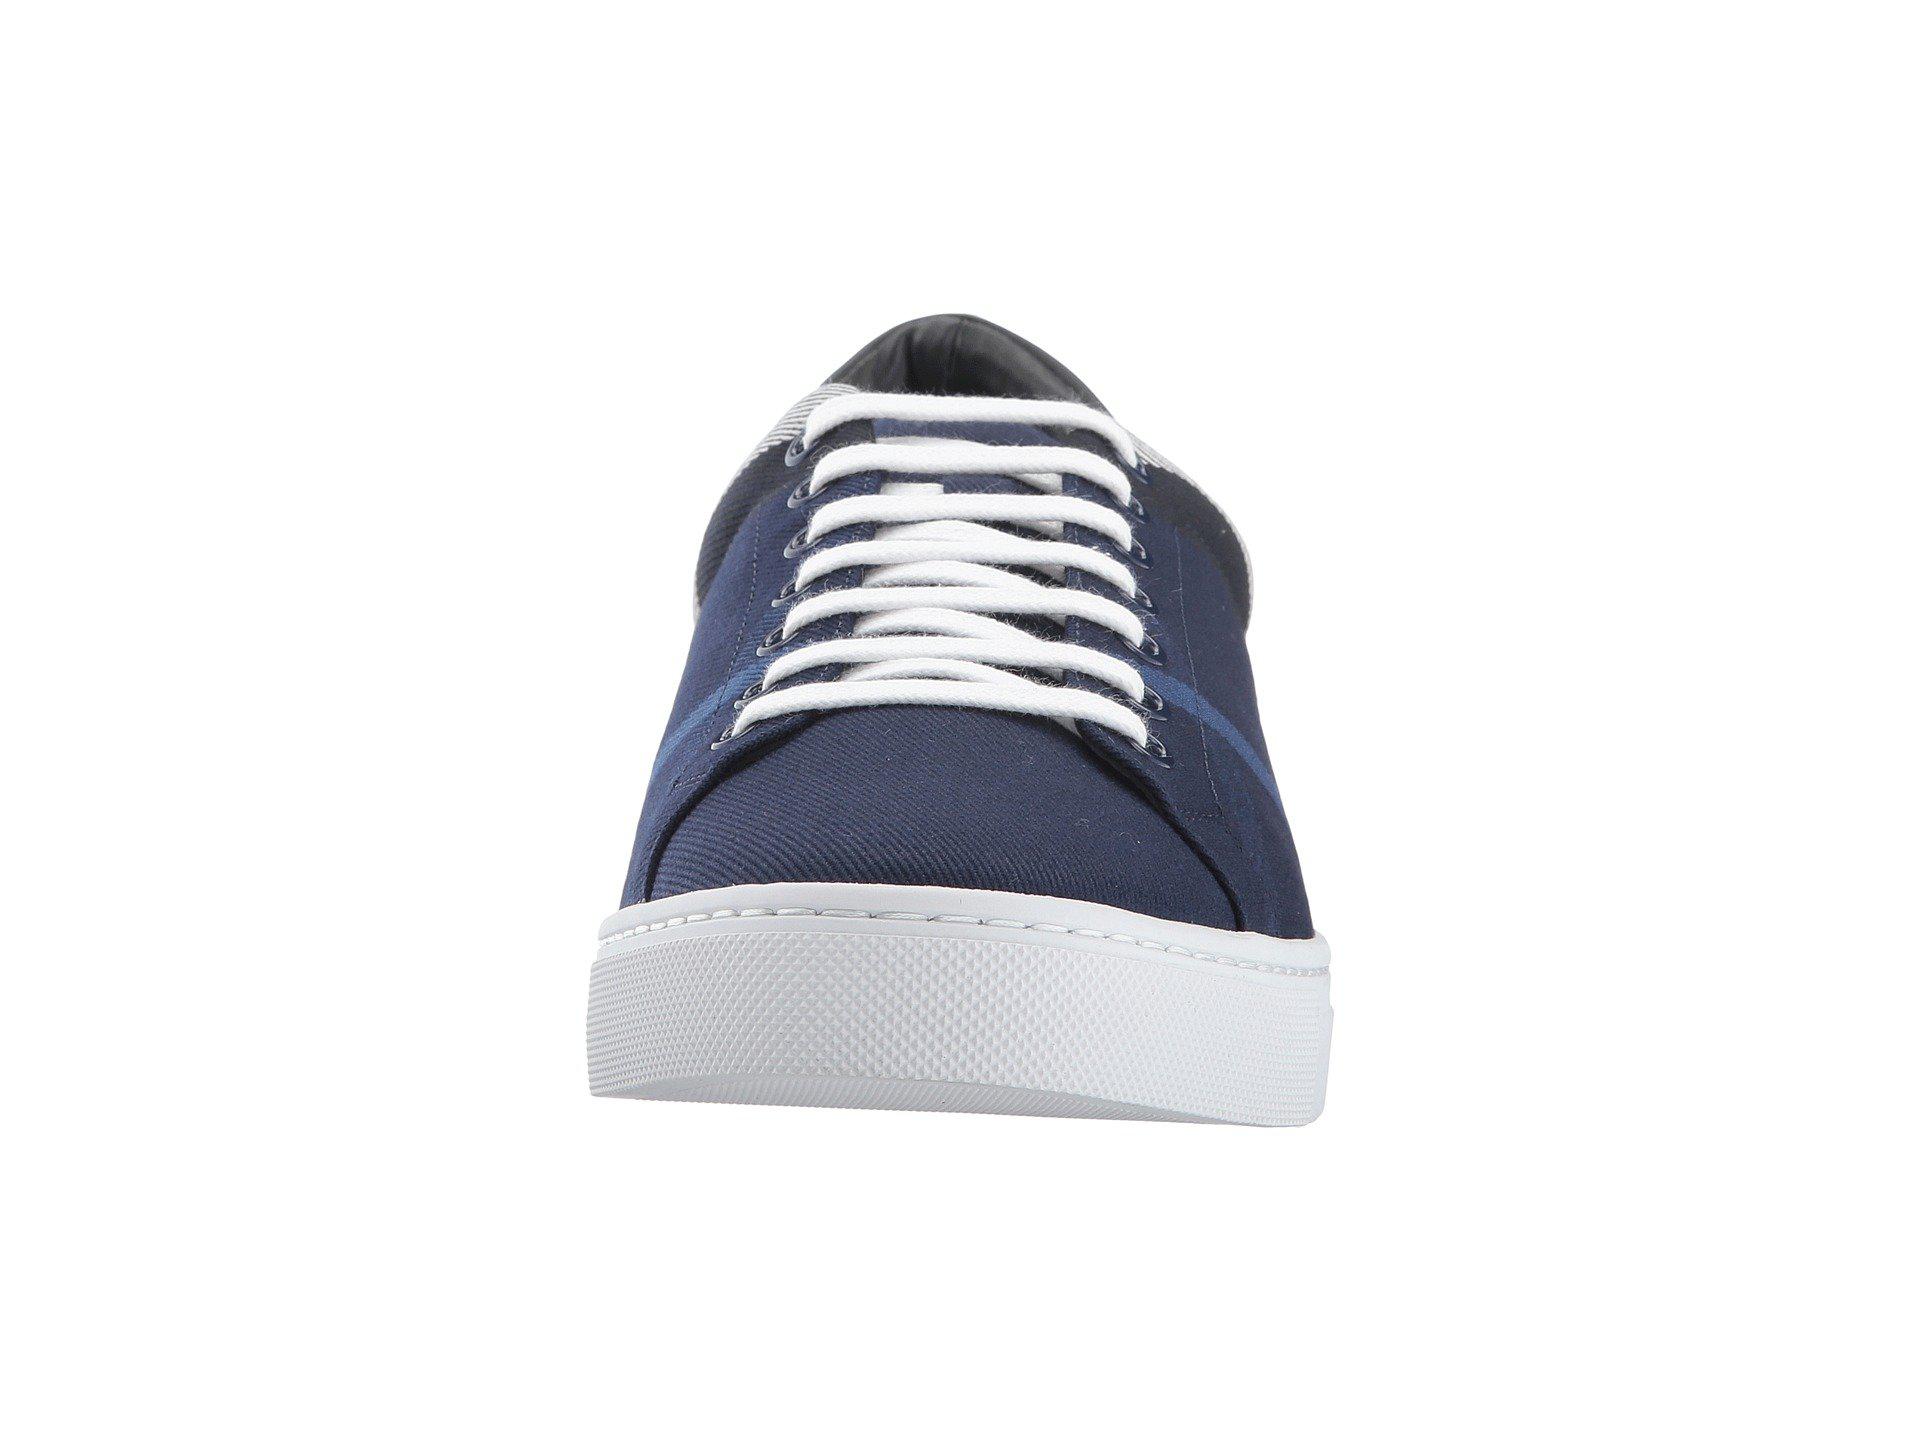 Burberry Cotton Albert House Check Low Top in Navy (Blue) for Men - Lyst